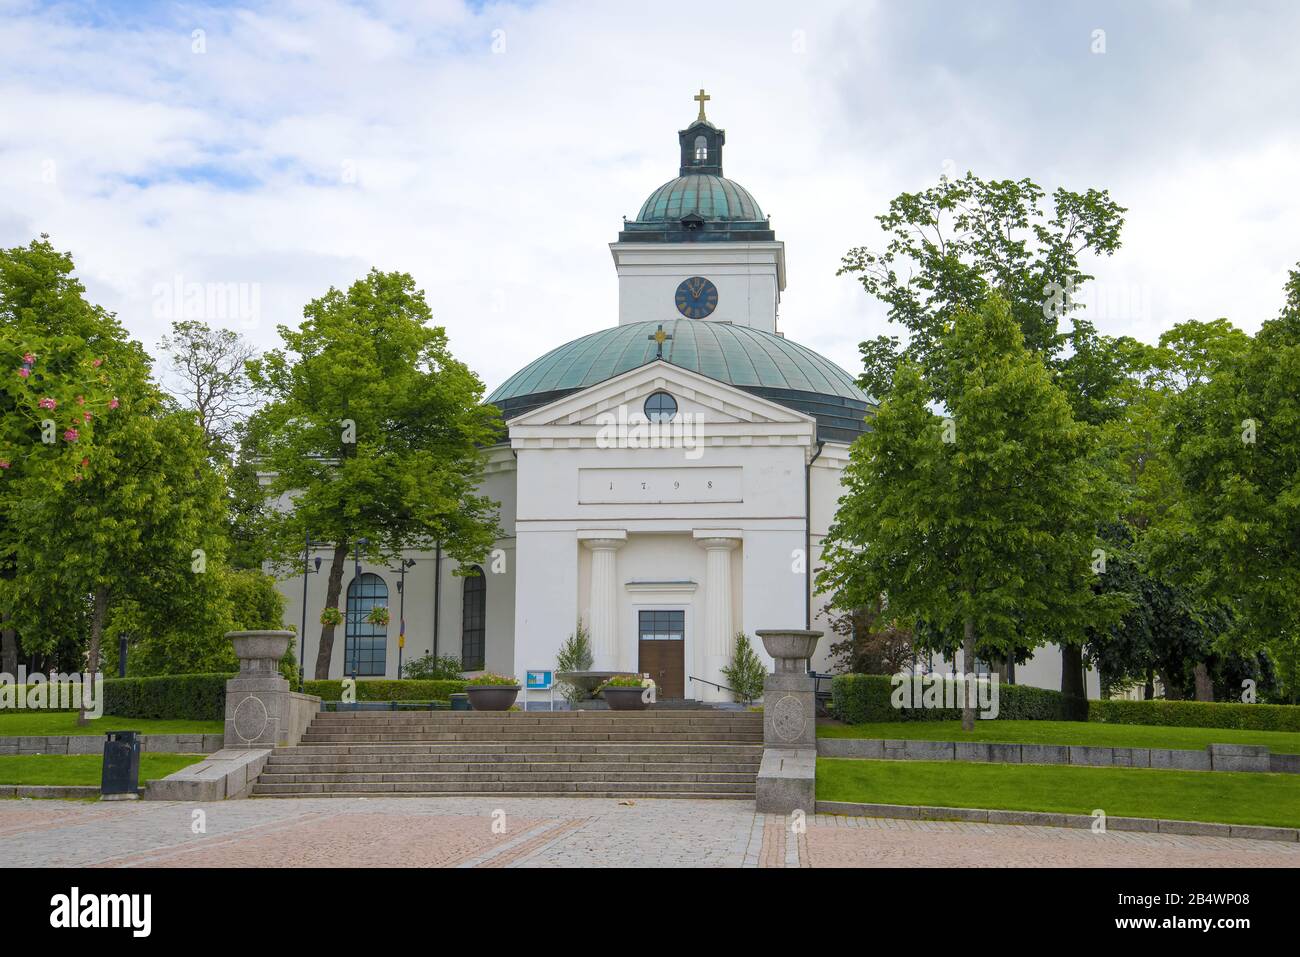 View of the old city church of Hameenlinna on a cloudy June day. Finland Stock Photo